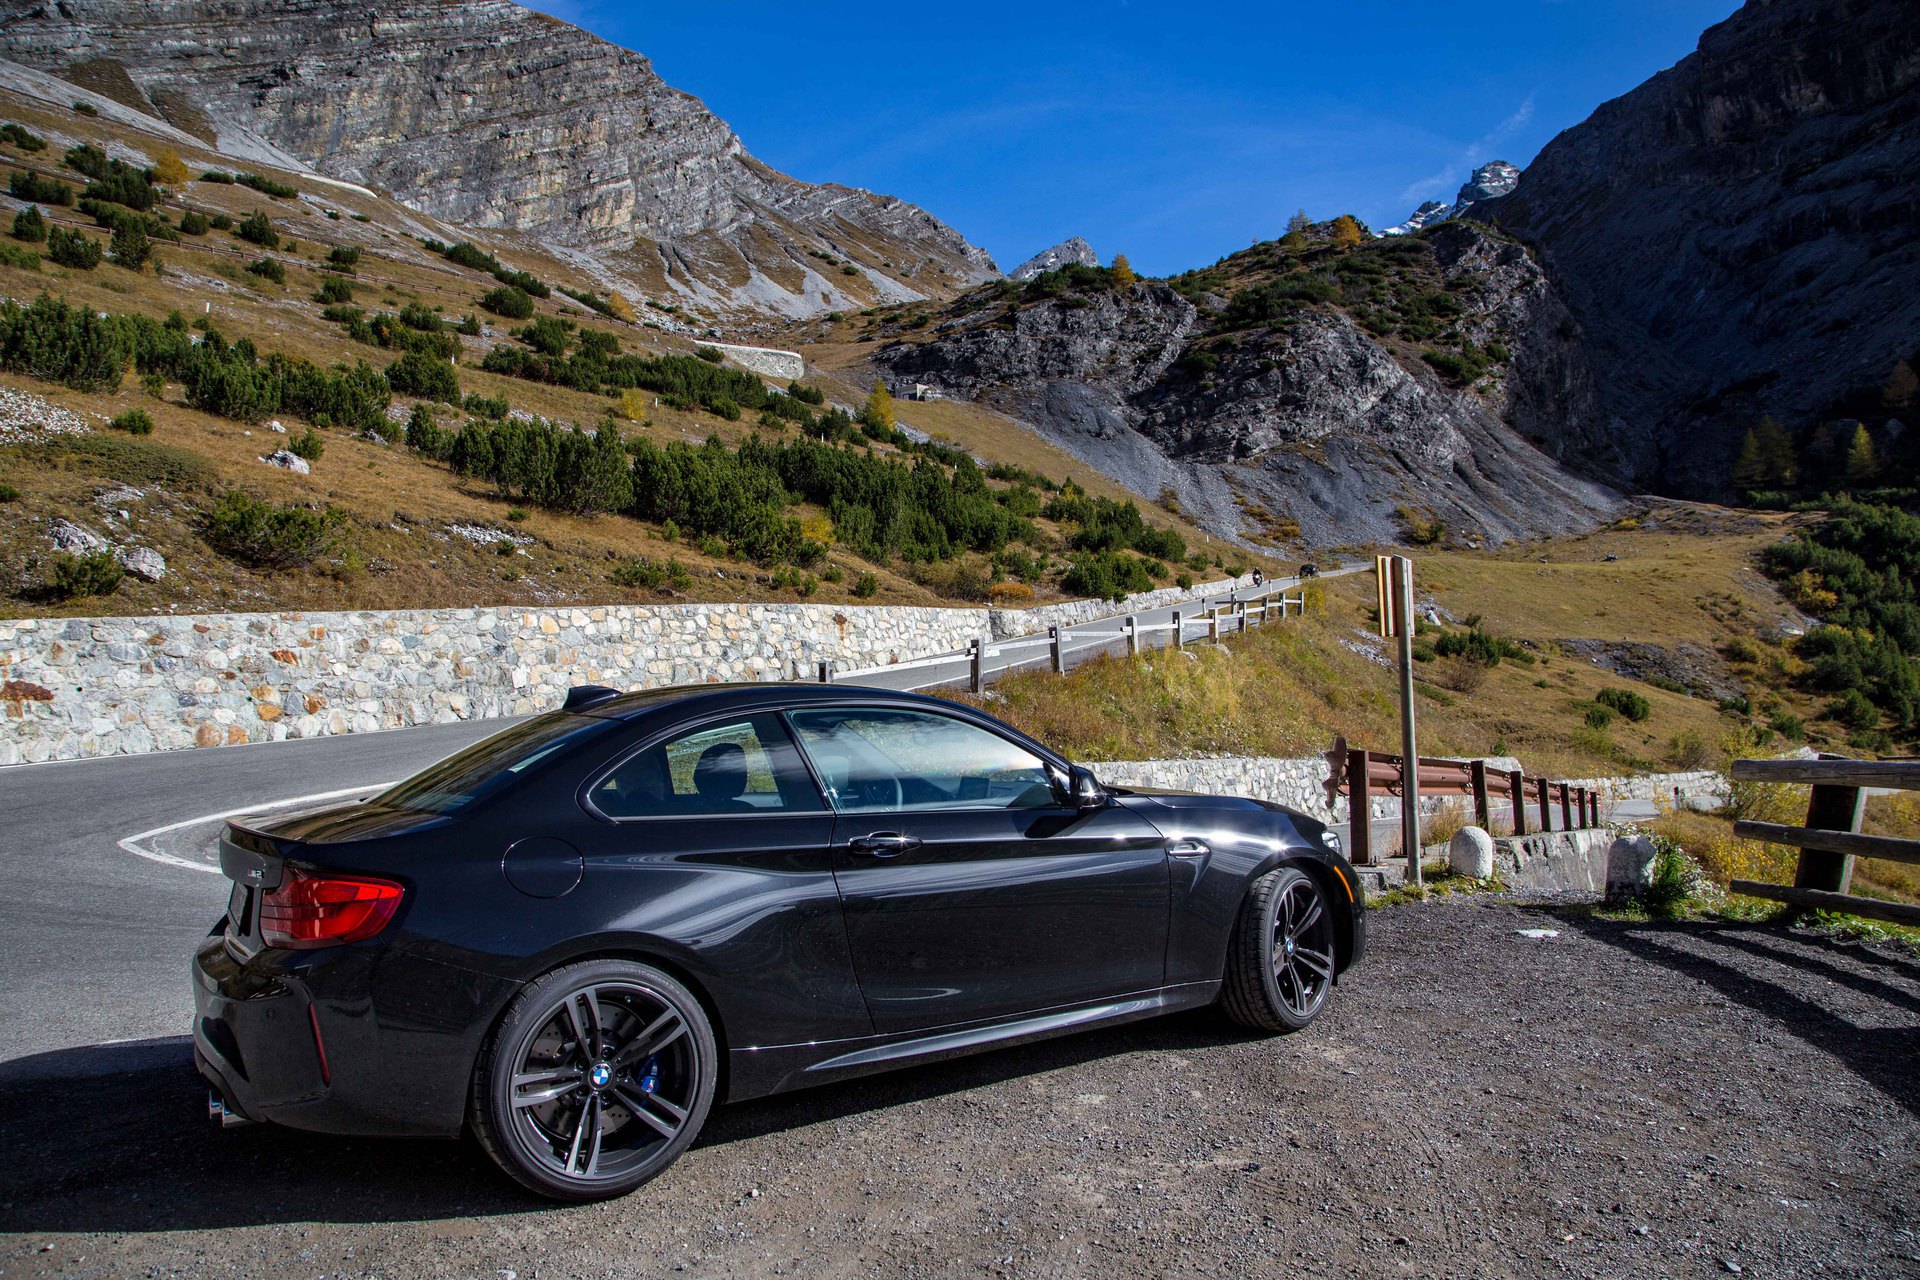 Black Sapphire Metallic M2 European Delivery: 5 countries in 10 days